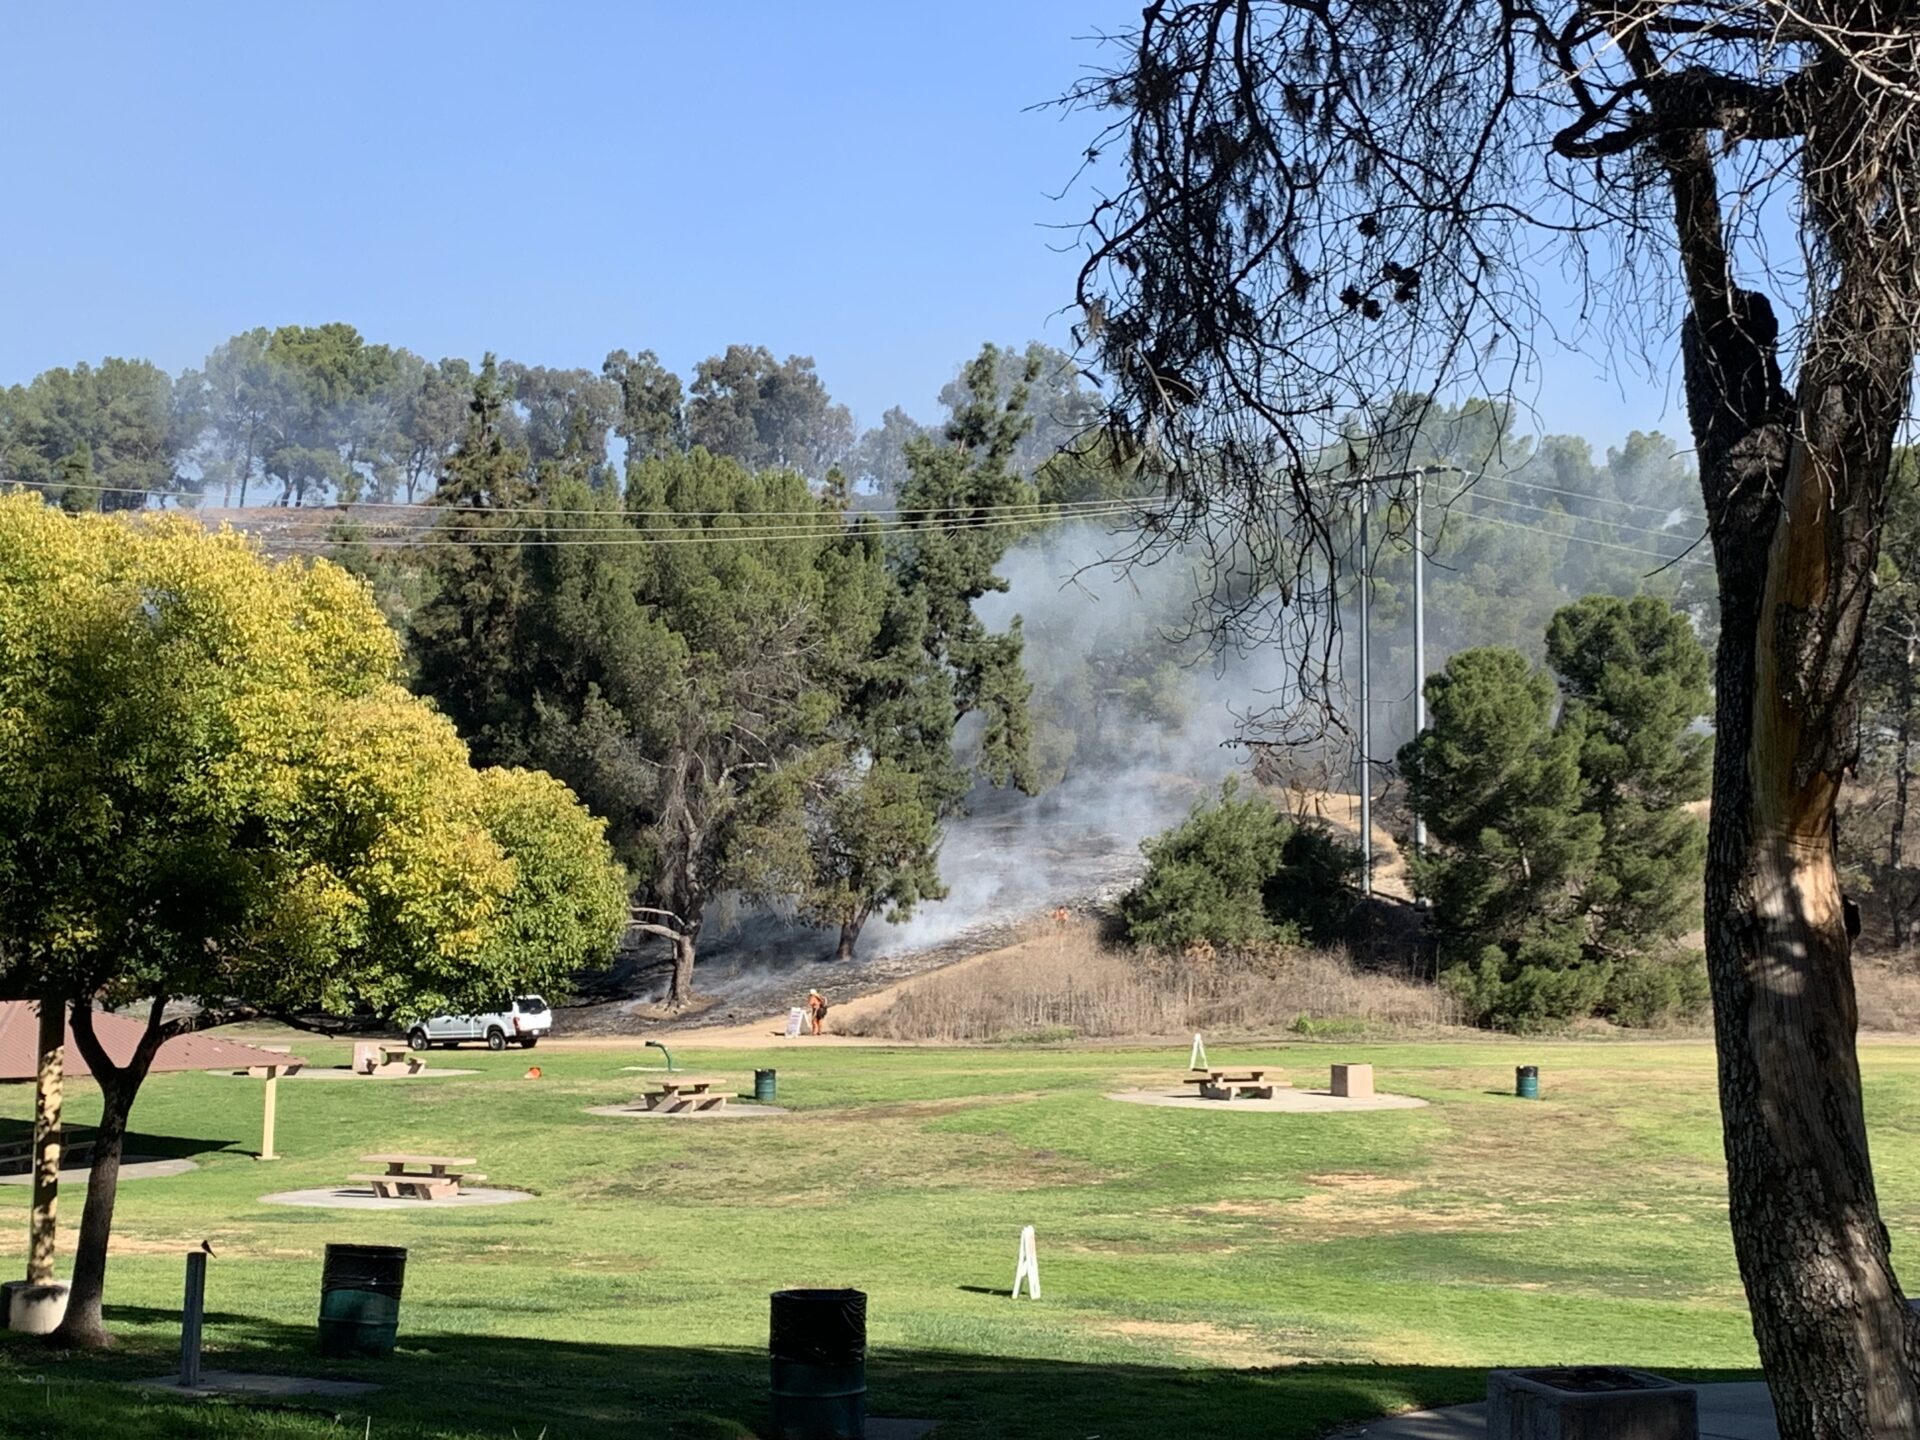 County of Los Angeles Fire Department (LACoFD) Division II firefighters and Camps Section personnel conducted a two-day prescribed burn event that commenced on Tuesday, November 14, through Wednesday, November 15, 2023, at Frank G. Bonelli Regional Park in San Dimas.